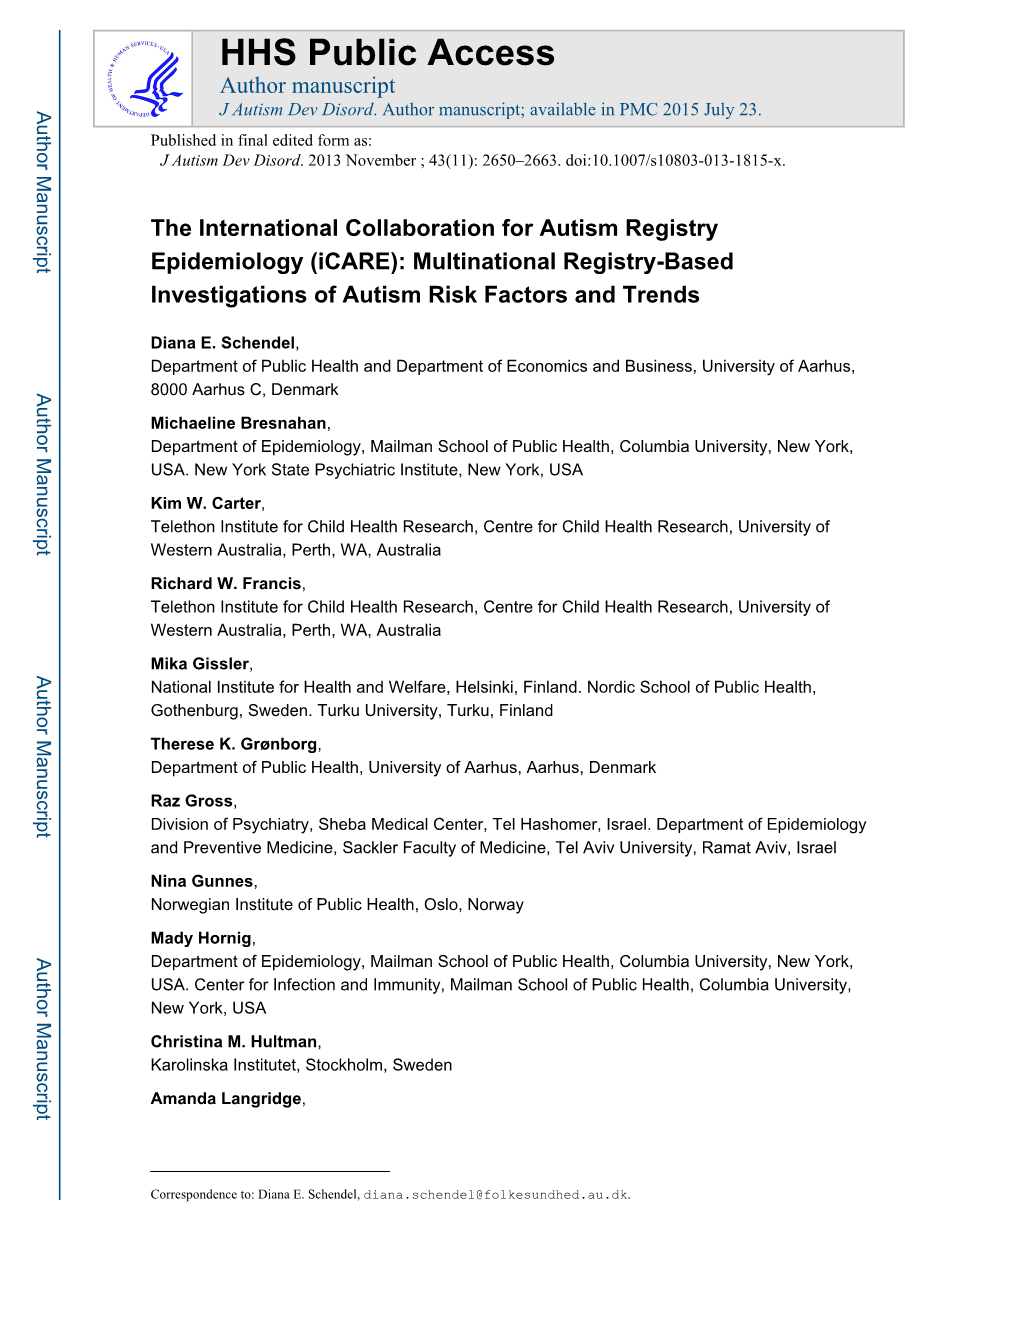 The International Collaboration for Autism Registry Epidemiology (Icare): Multinational Registry-Based Investigations of Autism Risk Factors and Trends